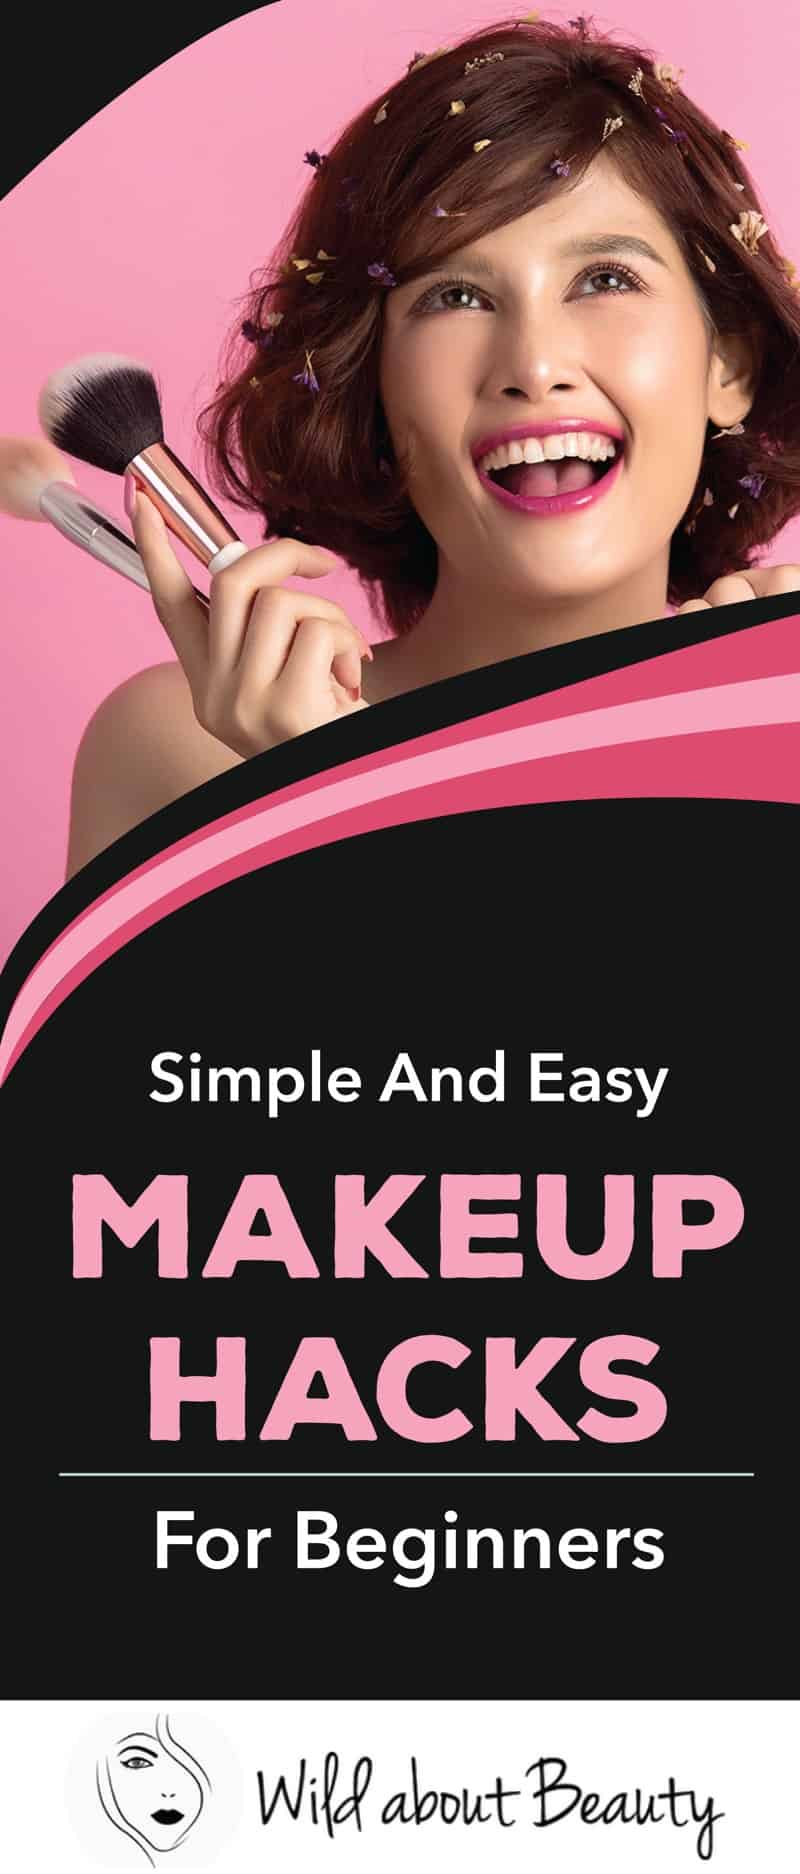 Simple And Easy Makeup Hacks For Beginners